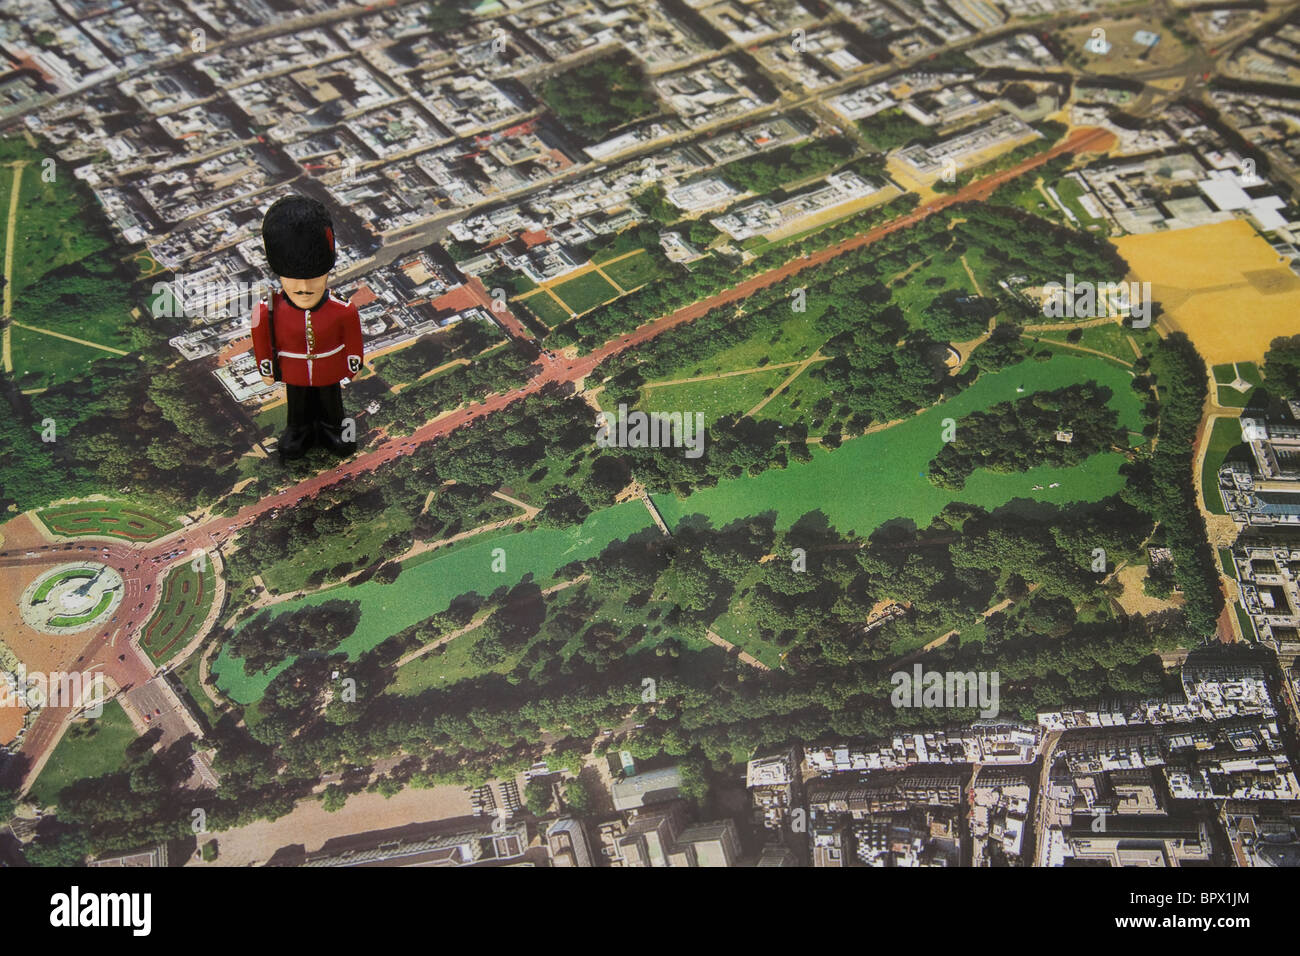 Mini Royal Guardsman Figurine on top of a Aerial View map of Buckingham palace and St james's park Stock Photo